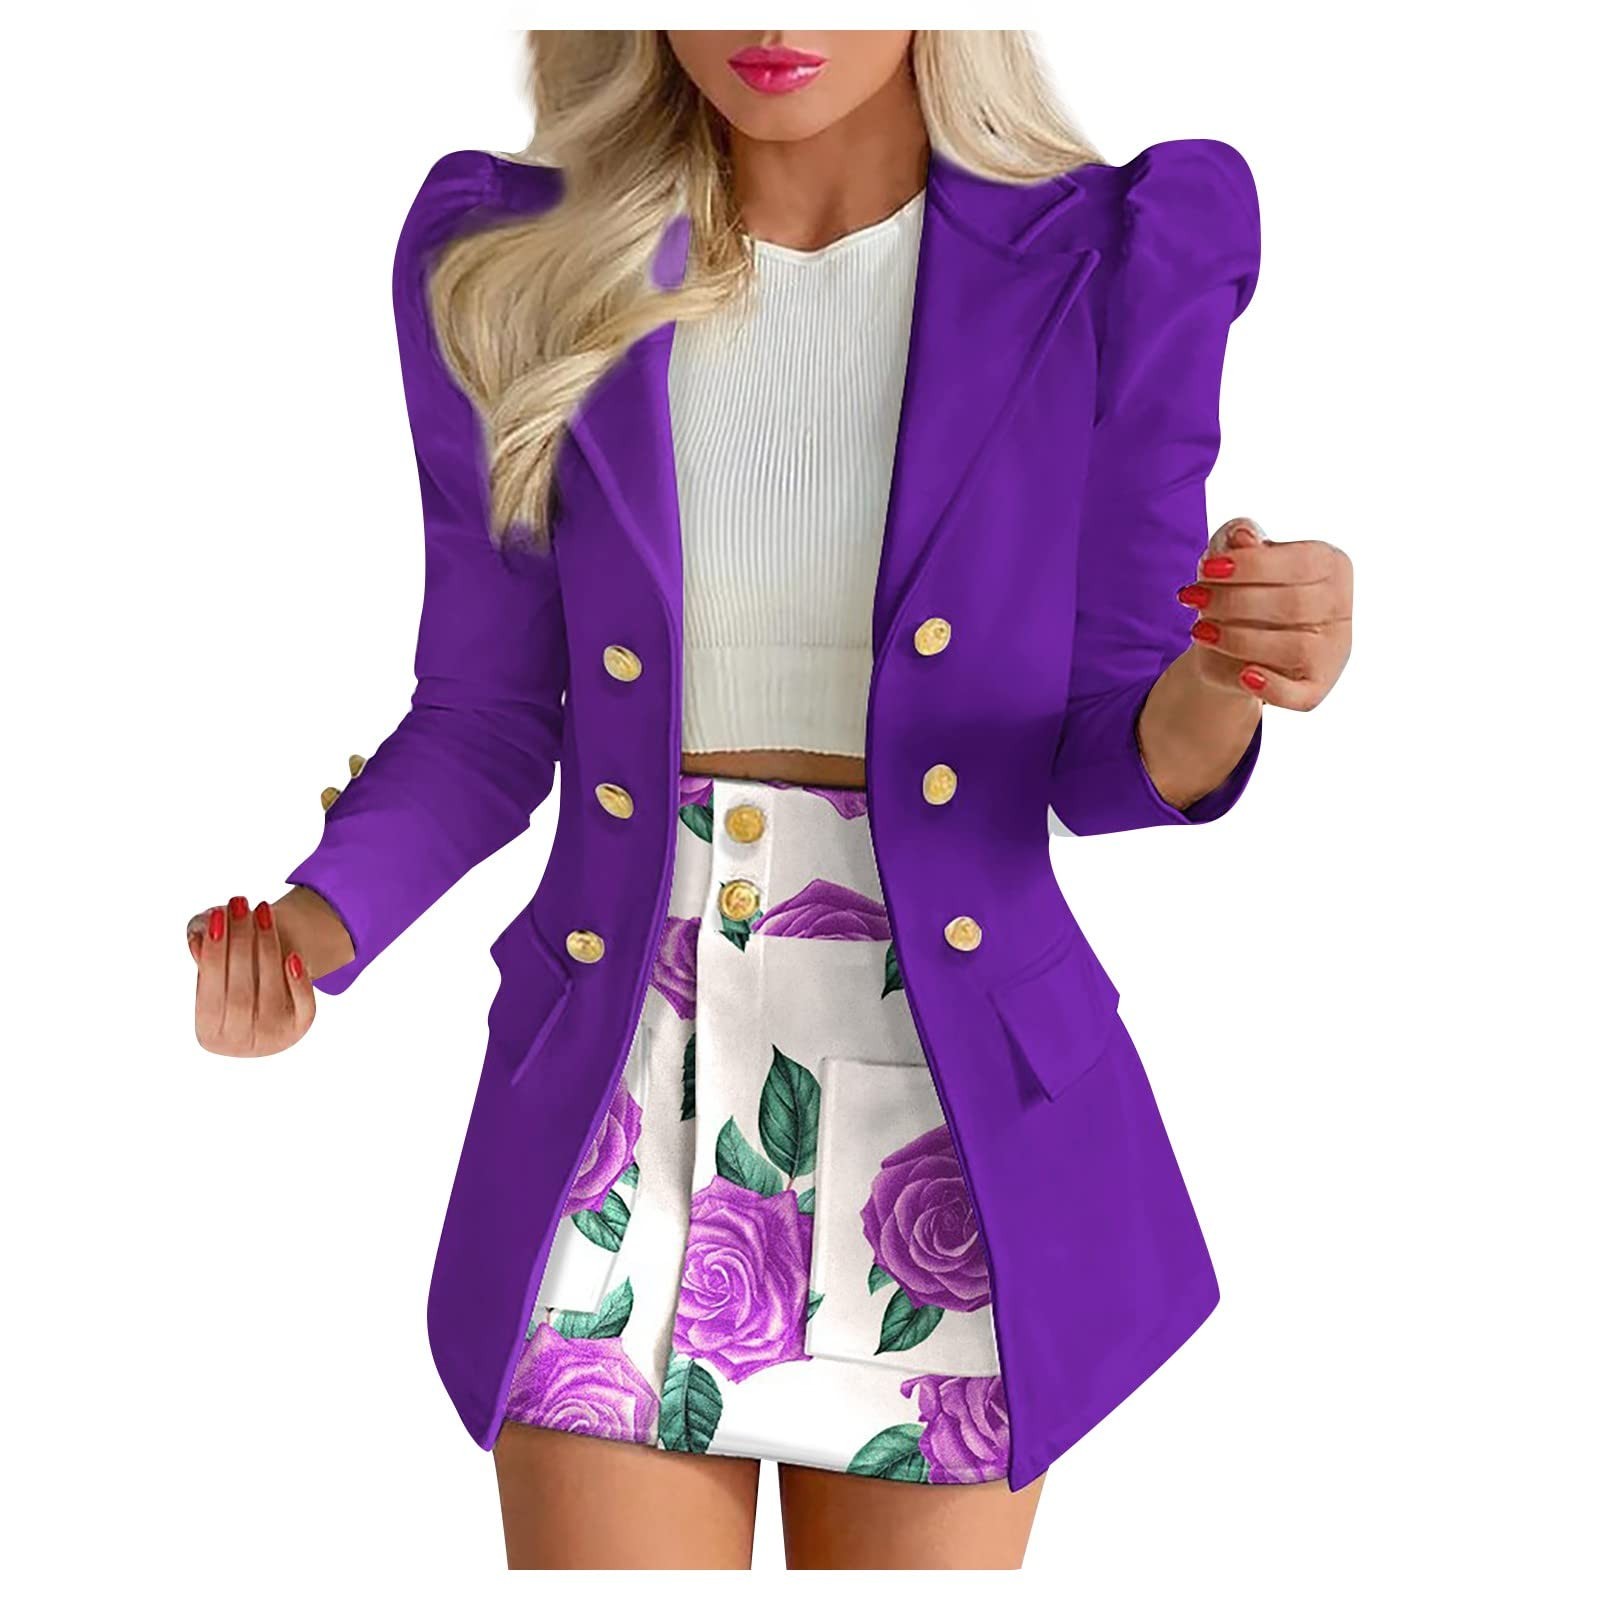 Juebong Women Buttons Long Sleeve Cardigan Coat with Short Skirt Suit with  Pocket,Purple suits sets size L 